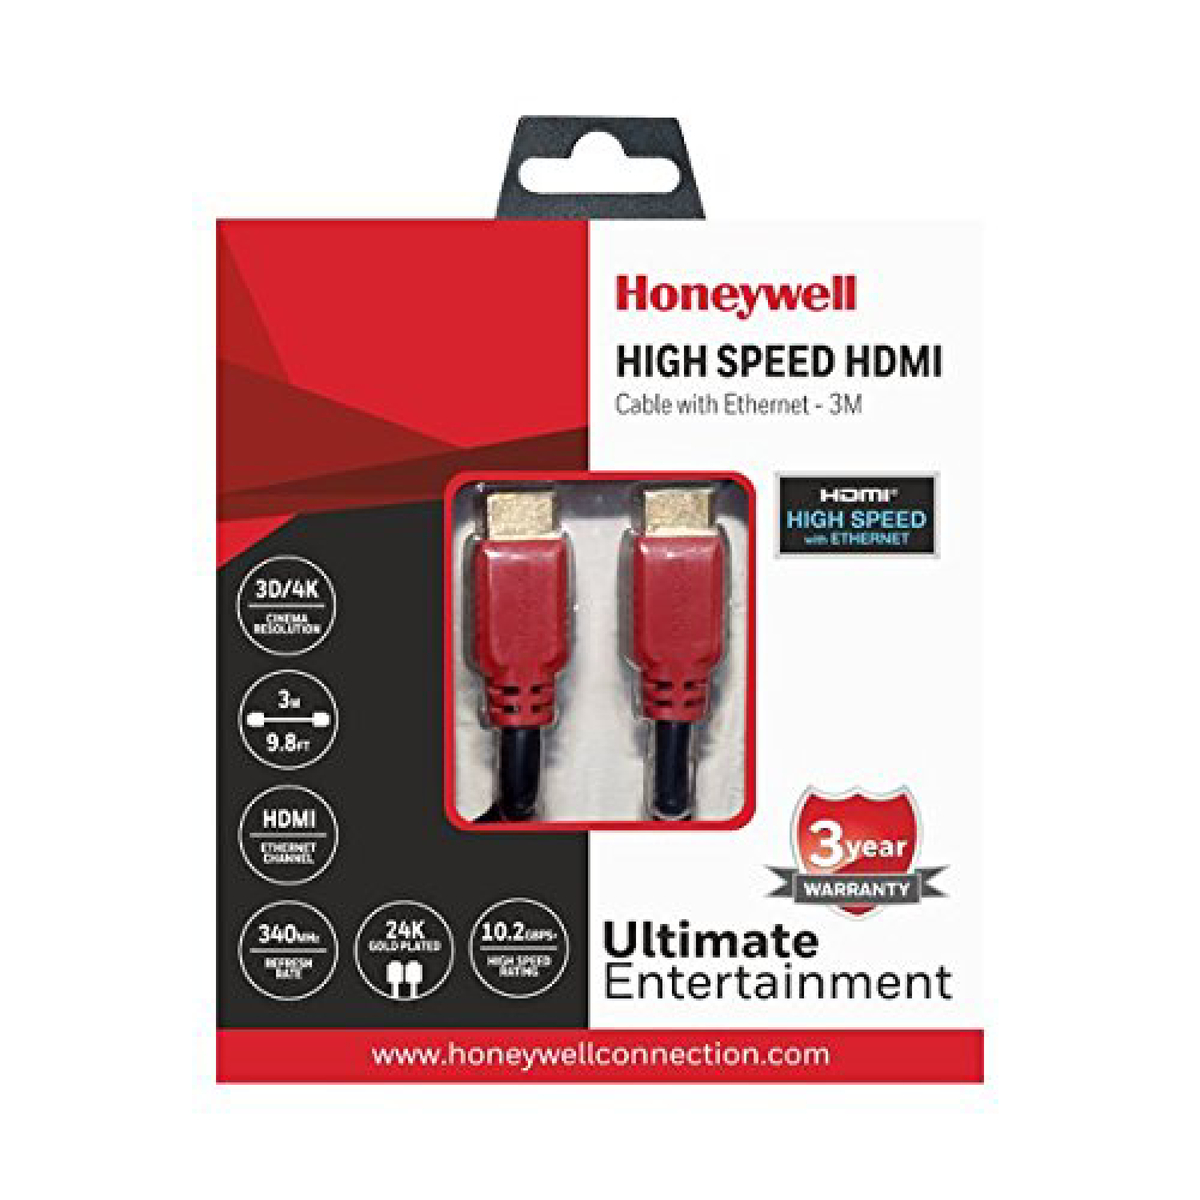 Honeywell HDMI Cable With Ethernet, 3 m, Black, HC000002/HDM